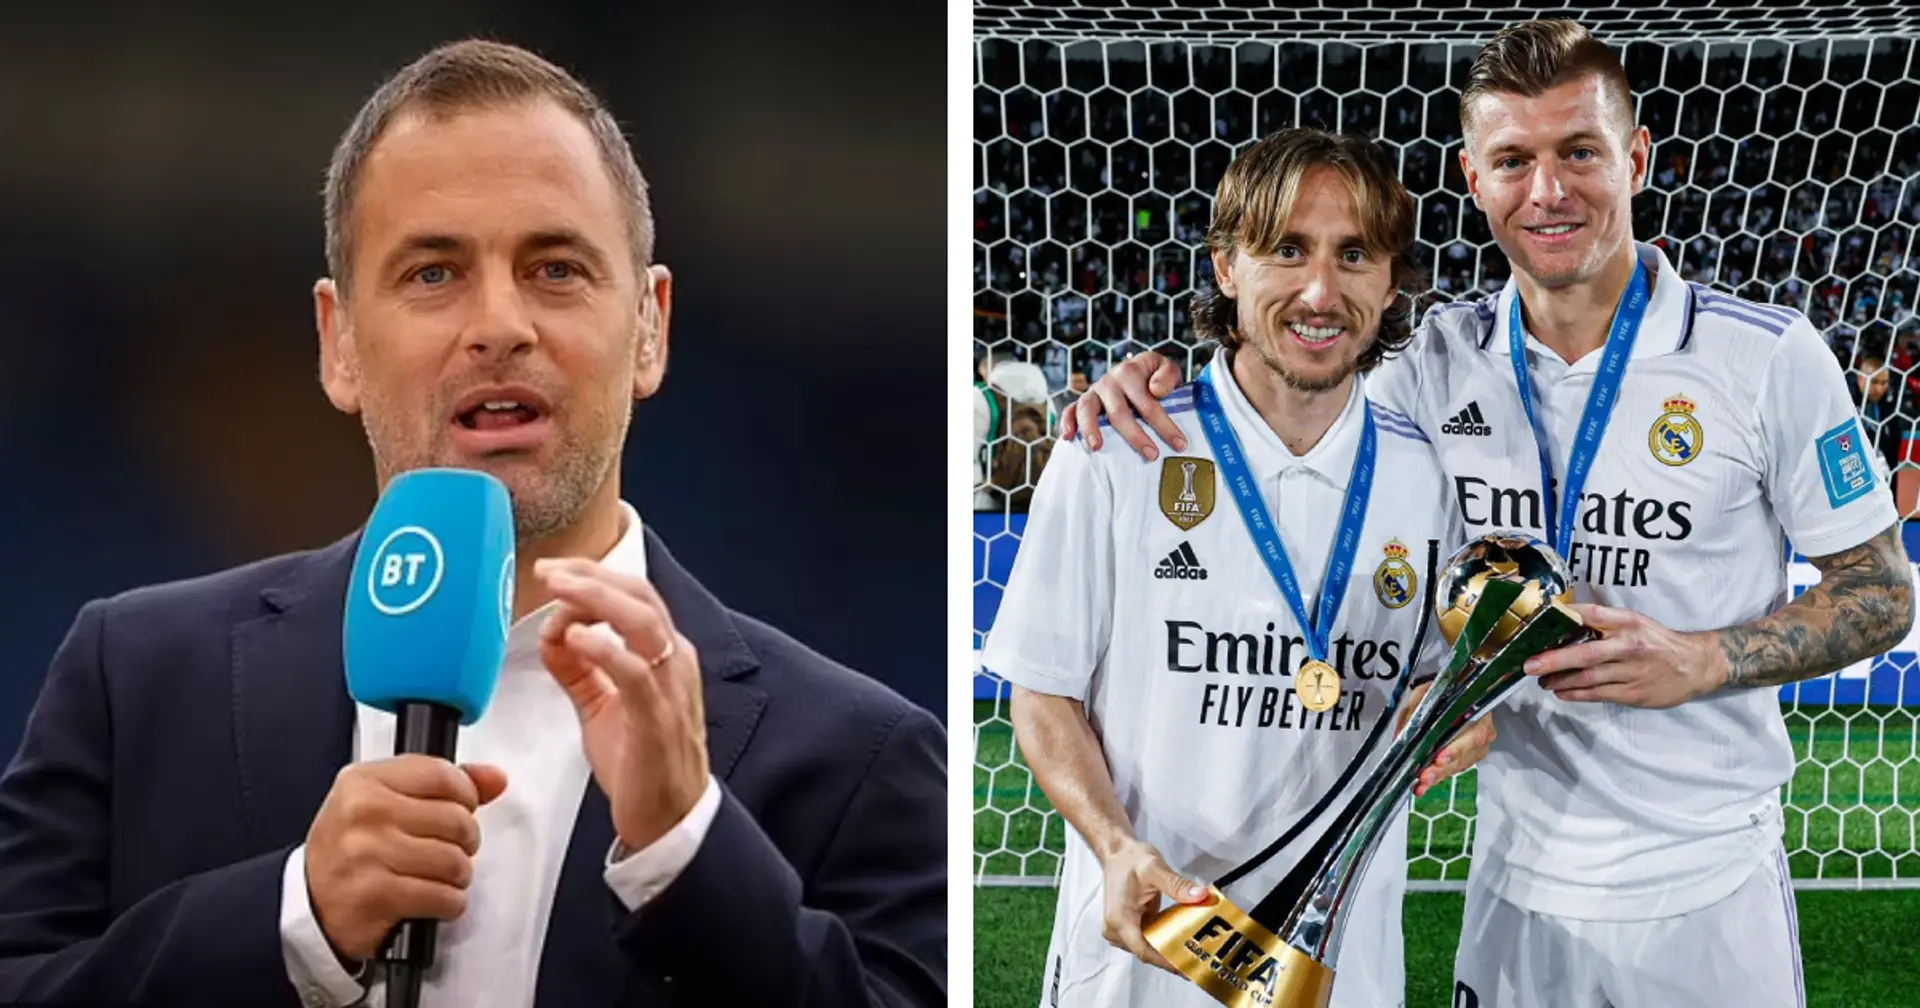 'Let's bring in some experienced players' Joe Cole calls on Chelsea to sign veteran Real Madrid duo